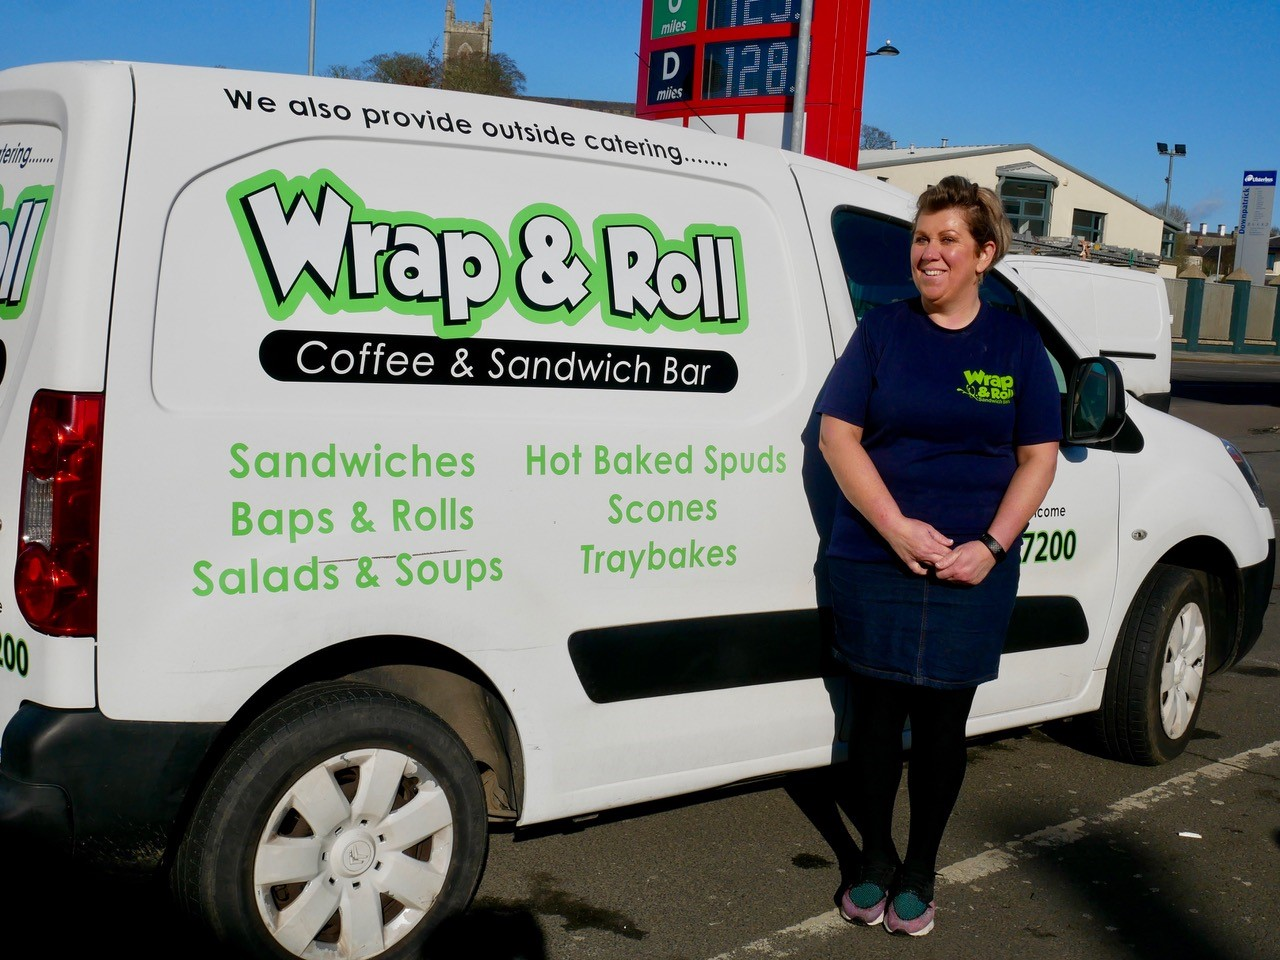 Catherina Kielty of Wrap & Roll filling the van with water for the Jimmy’s 10K race on March 15th